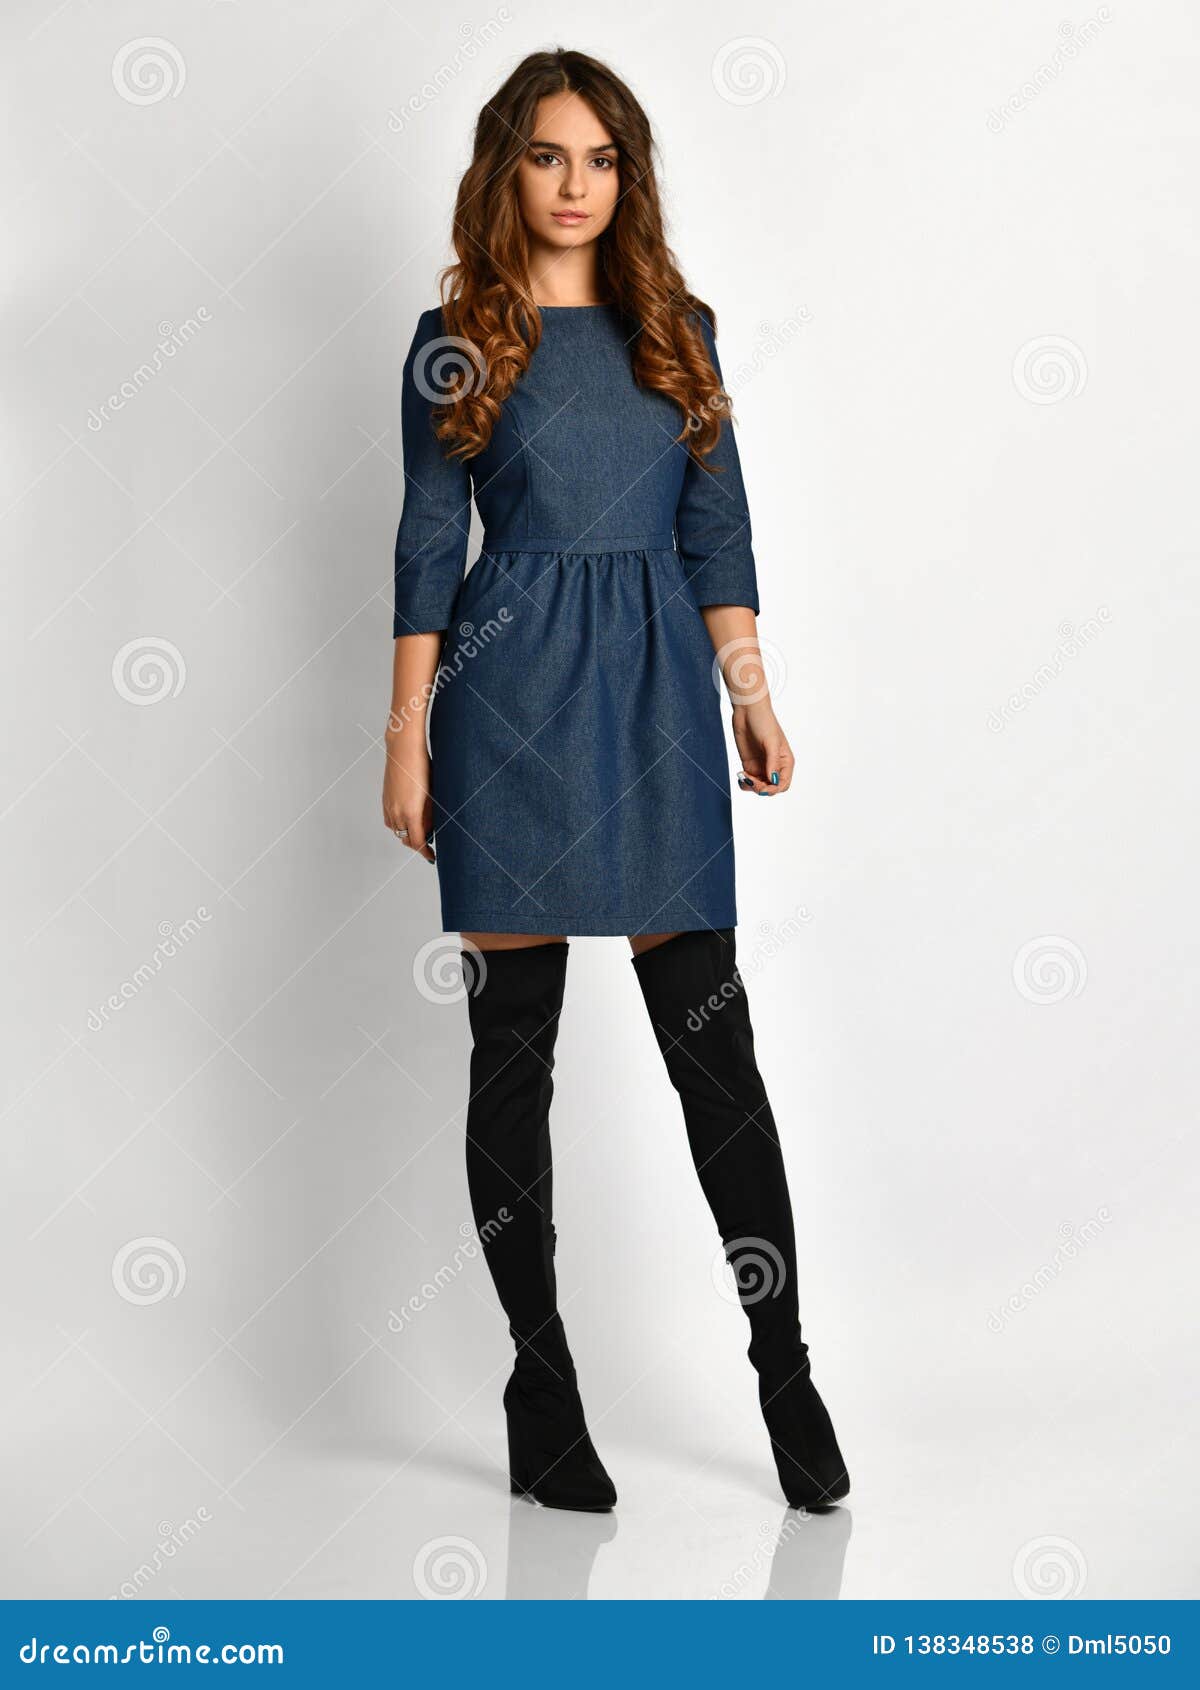 Young Beautiful Woman Posing in New Fashion Blue Jeans Pattern Winter ...